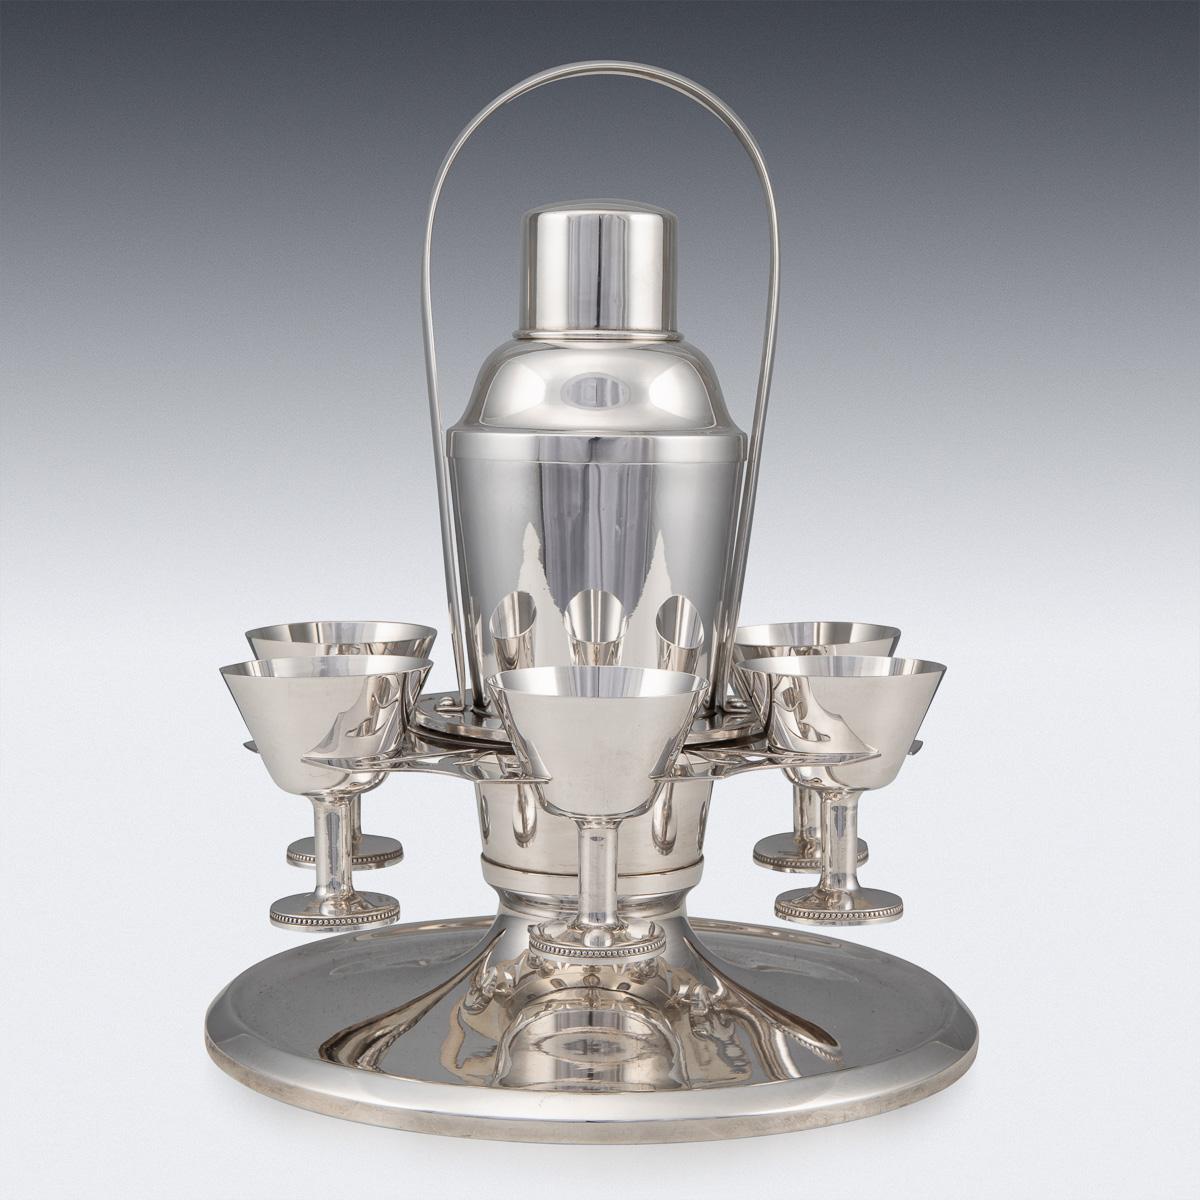 Swedish 20th Century Art Deco Silver Plated Cocktail Shaker & Glasses On Stand, c.1930